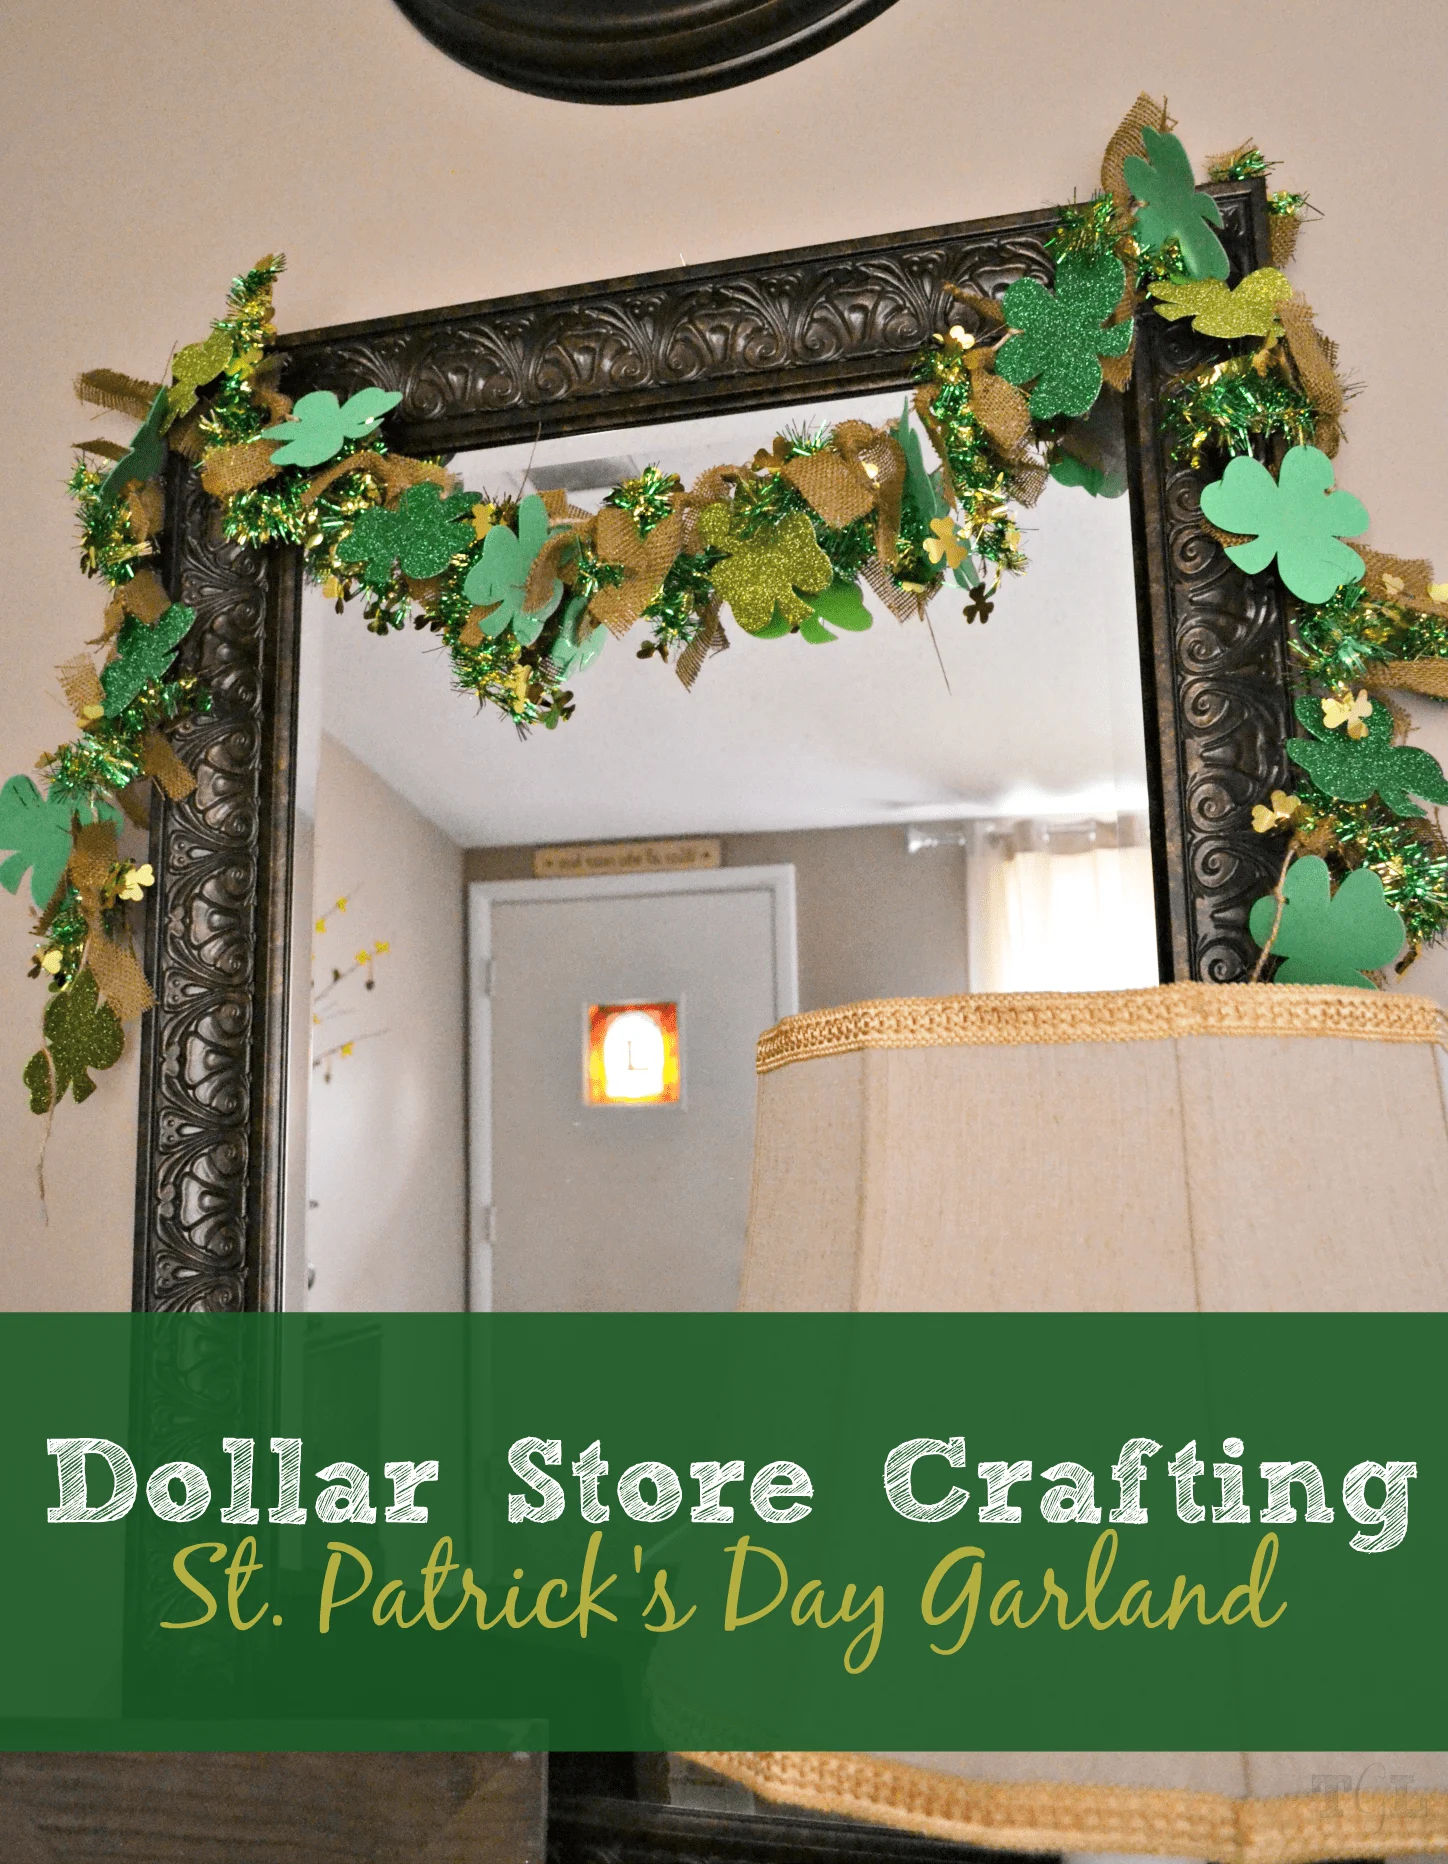 Dollar Store Crafting: St. Patrick's Day Garland  